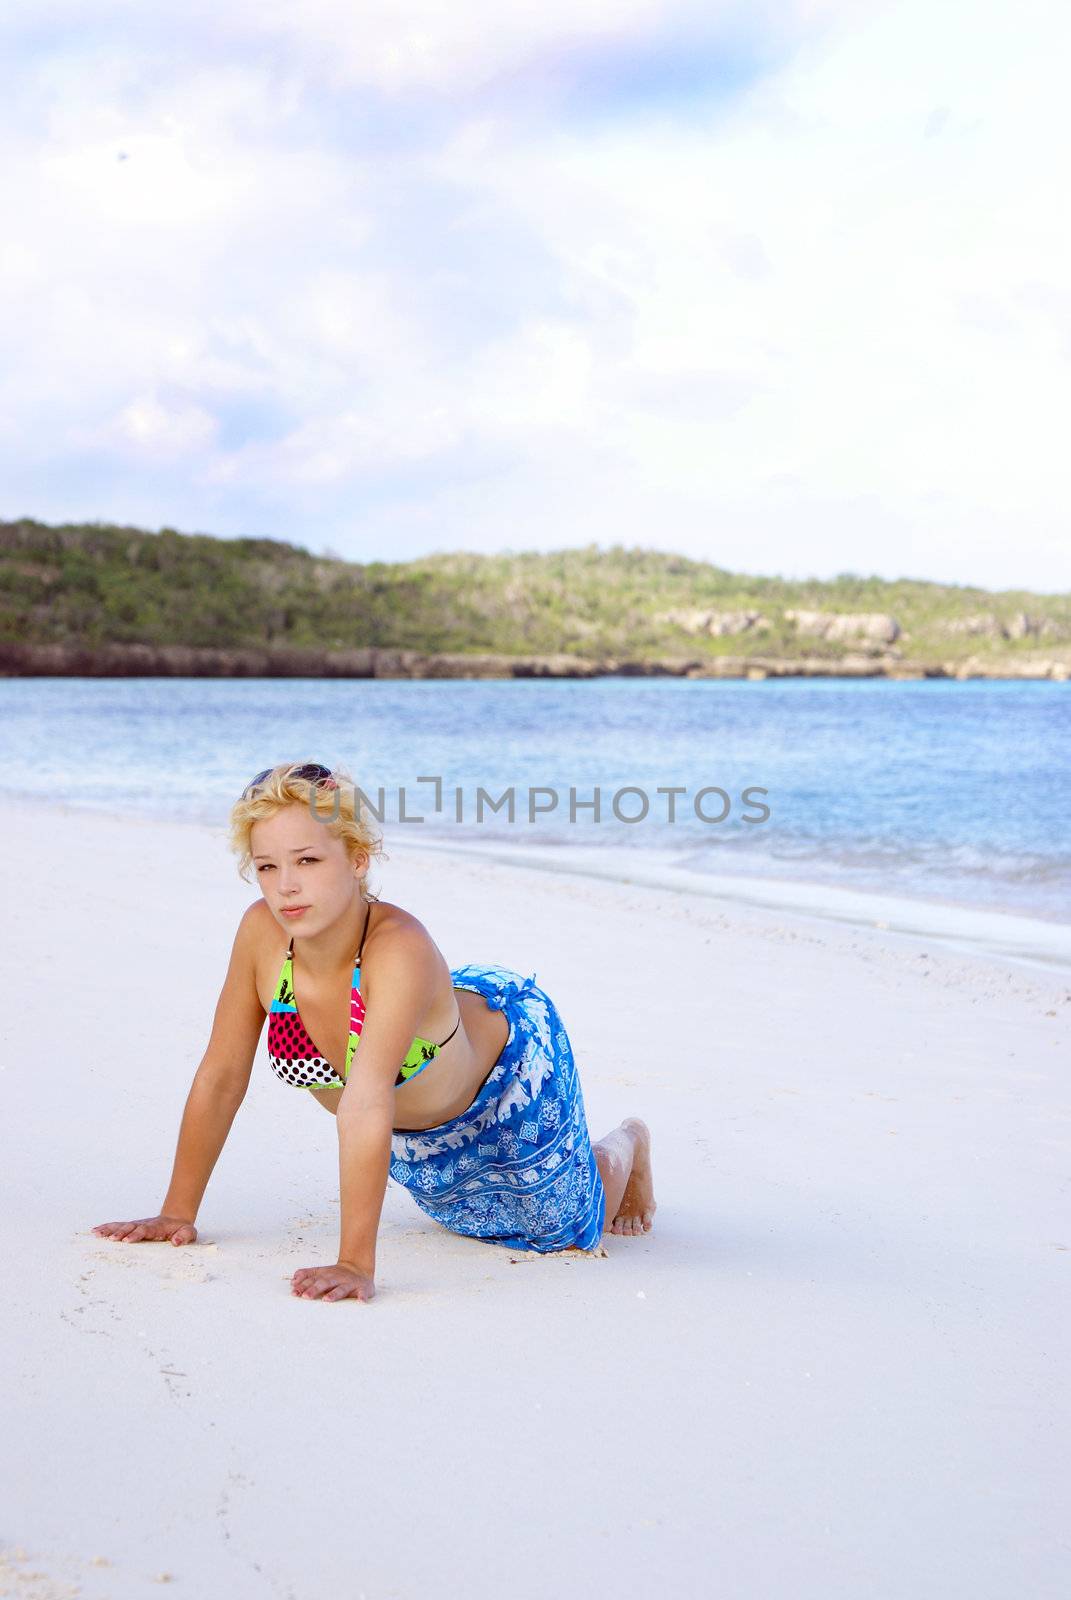 A young girl is posing on the beach.